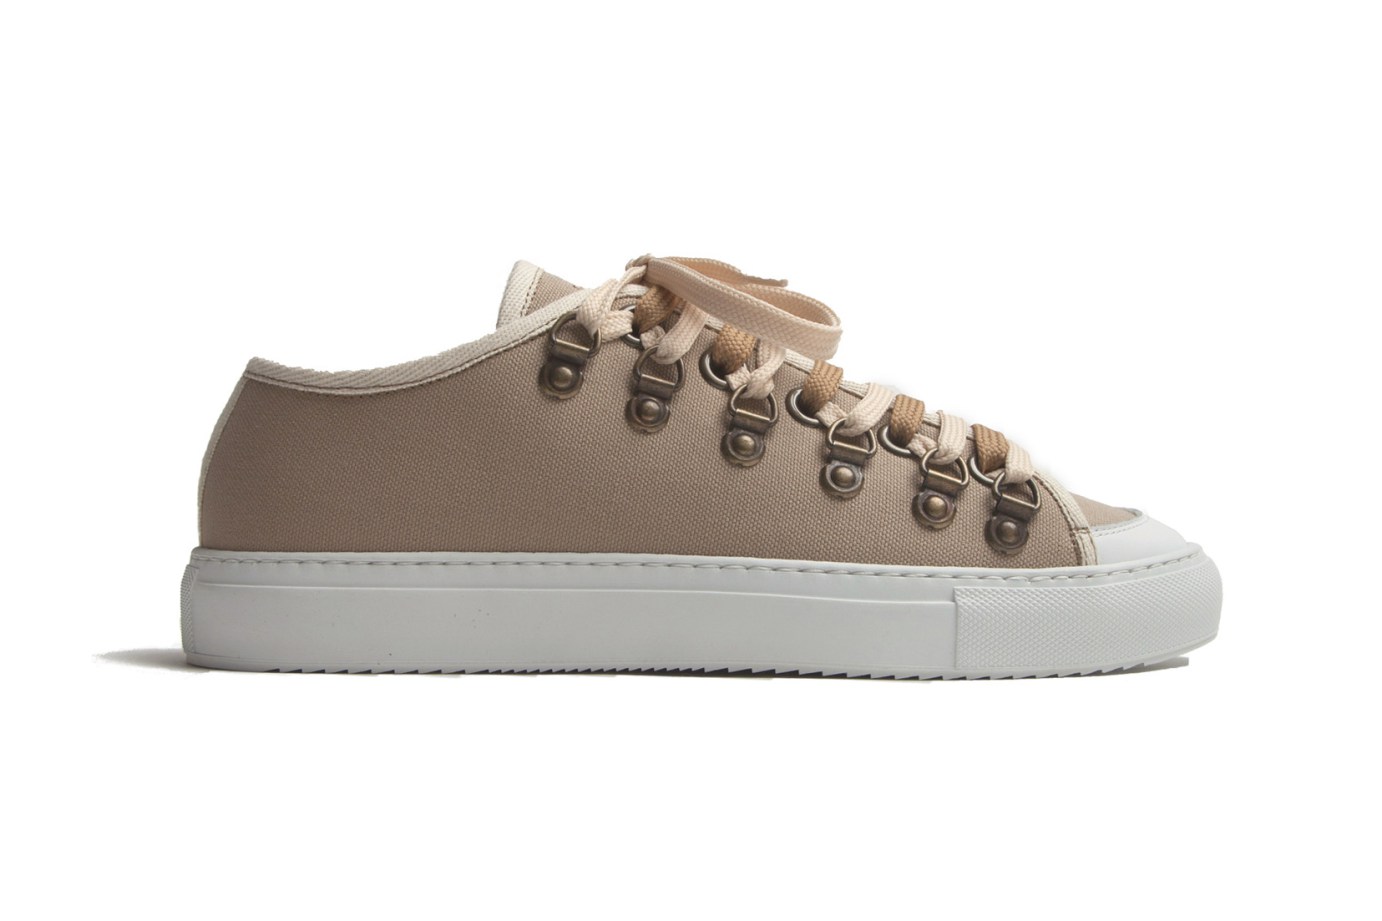 J.W. Anderson Releases A Low Canvas Sneaker